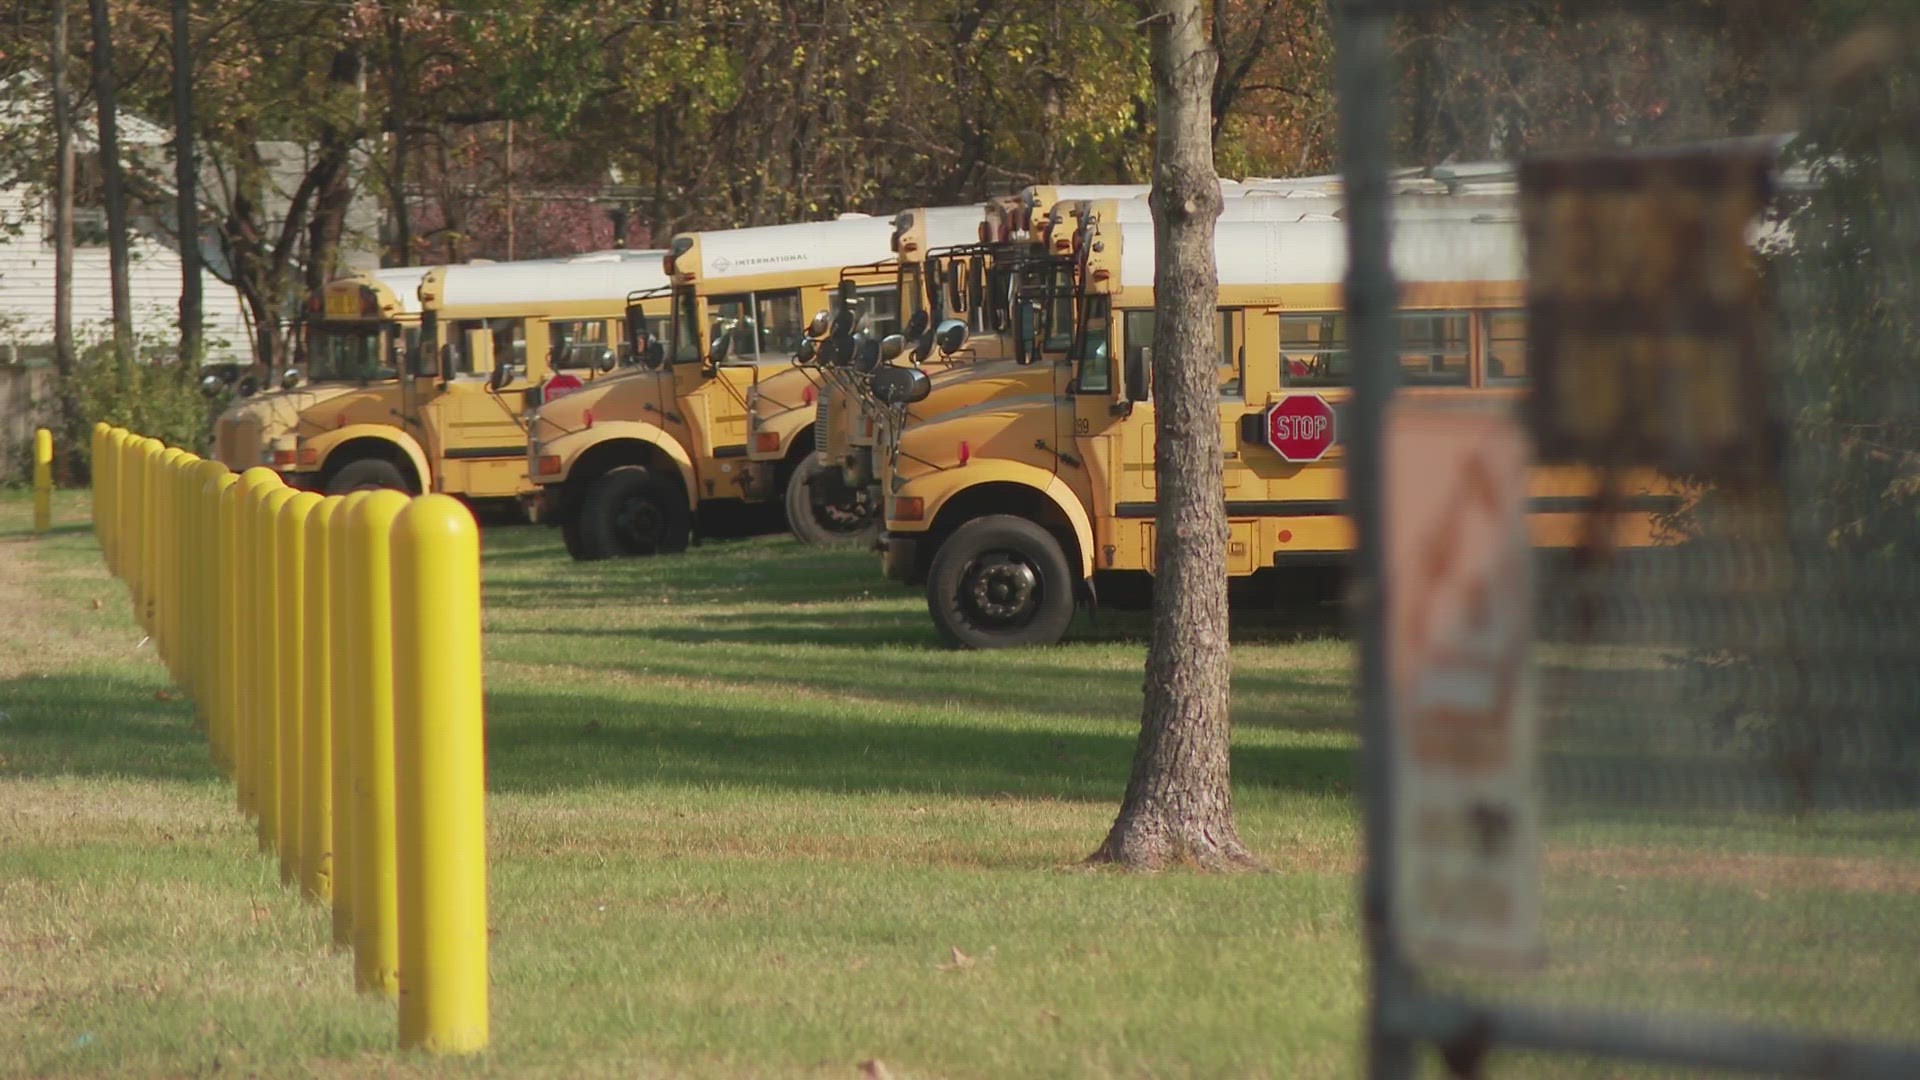 JCPS is explaining the 'call-outs' while one former driver said she supports the actions of her former colleagues.